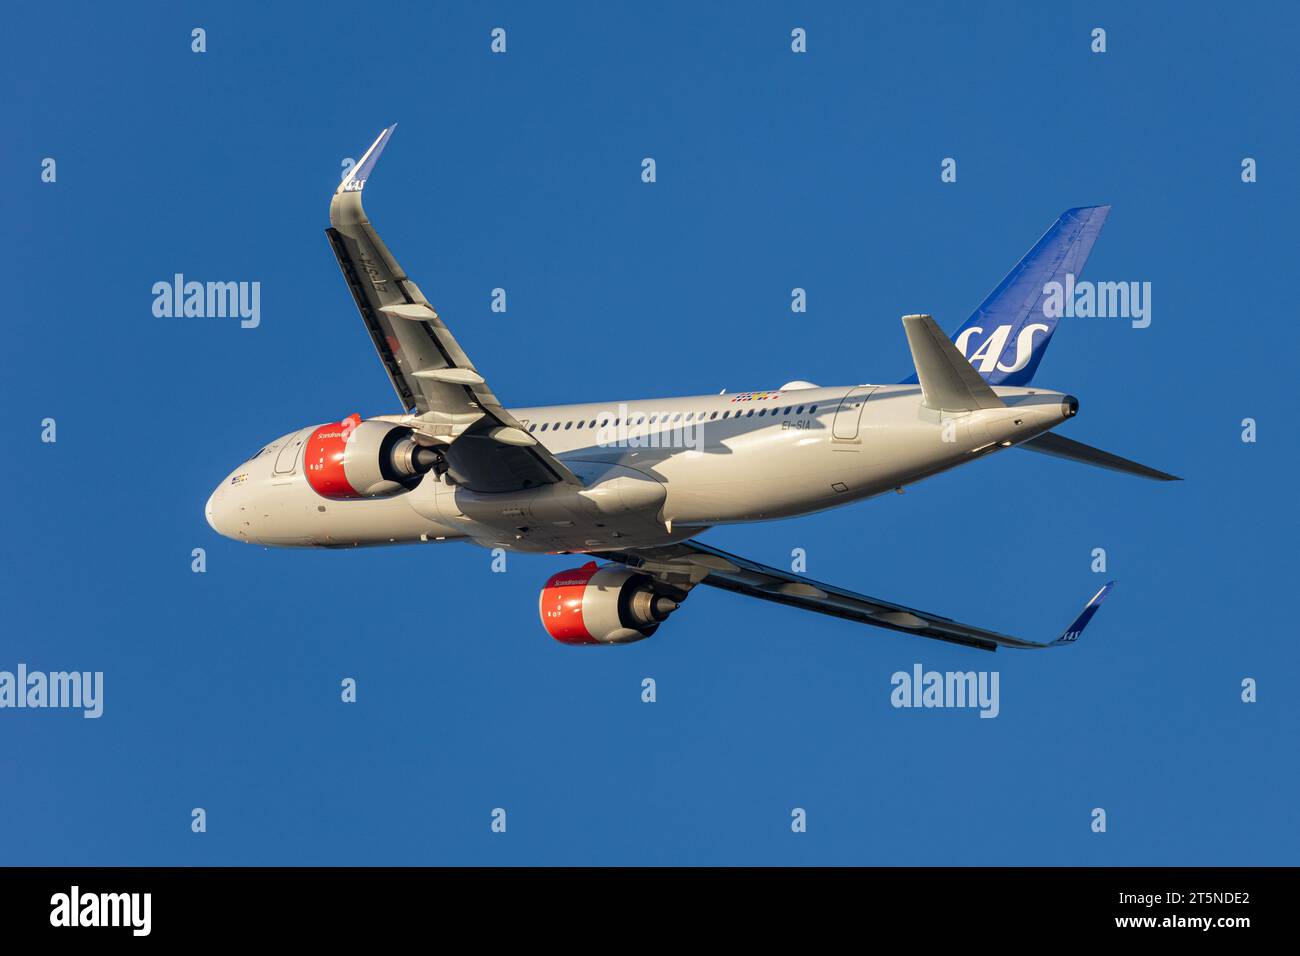 SAS Airbus A320-251N Neo, registration EI-SIA banking out of a sunny, autumnal London Heathrow airport in the evening golden hour Stock Photo